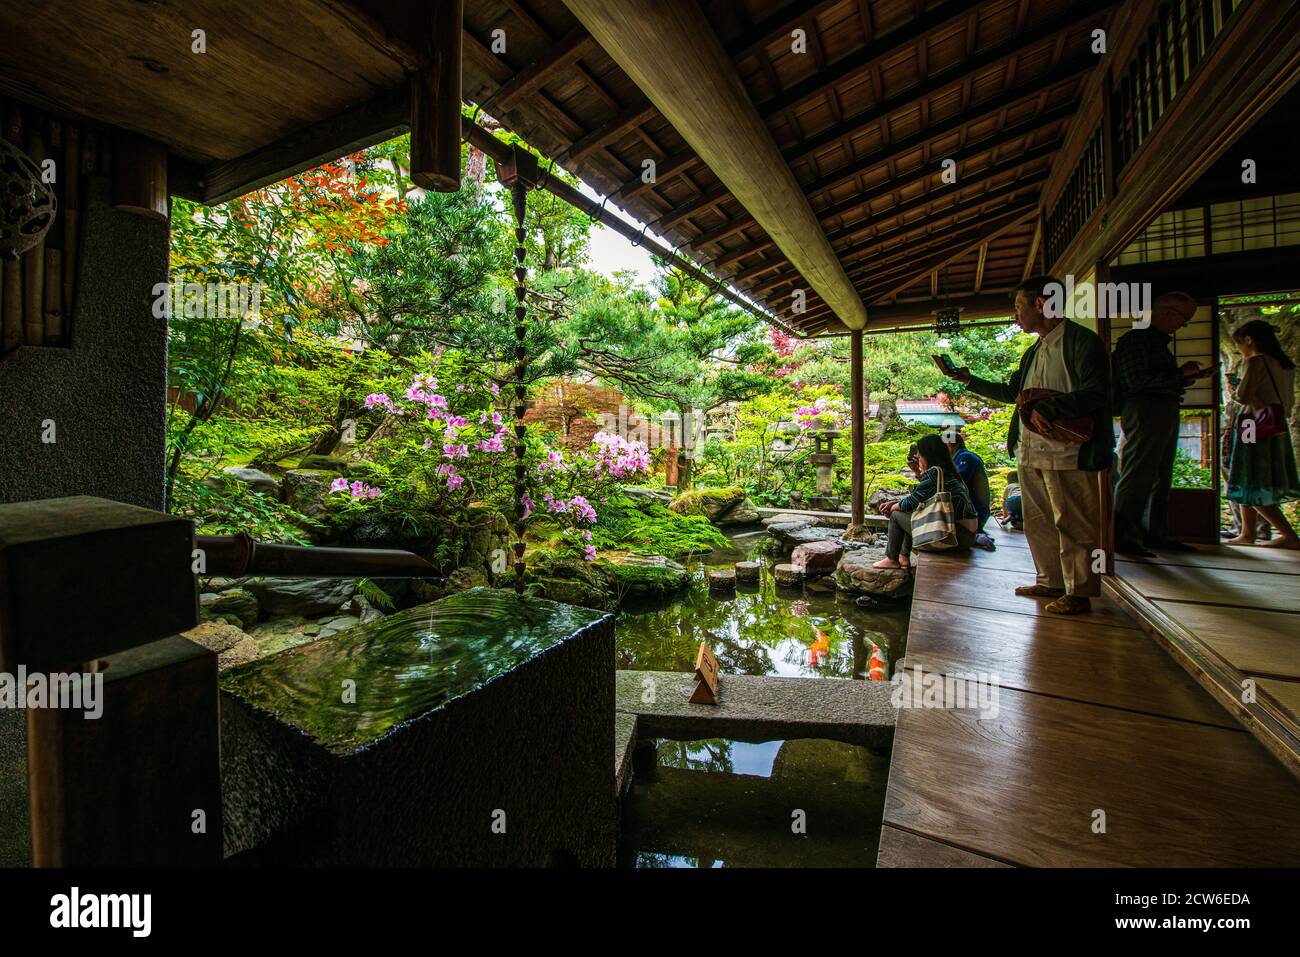 The exquisite garden at Nomura Family's House in the Nagamachi district of Kanazawa, Japan Stock Photo